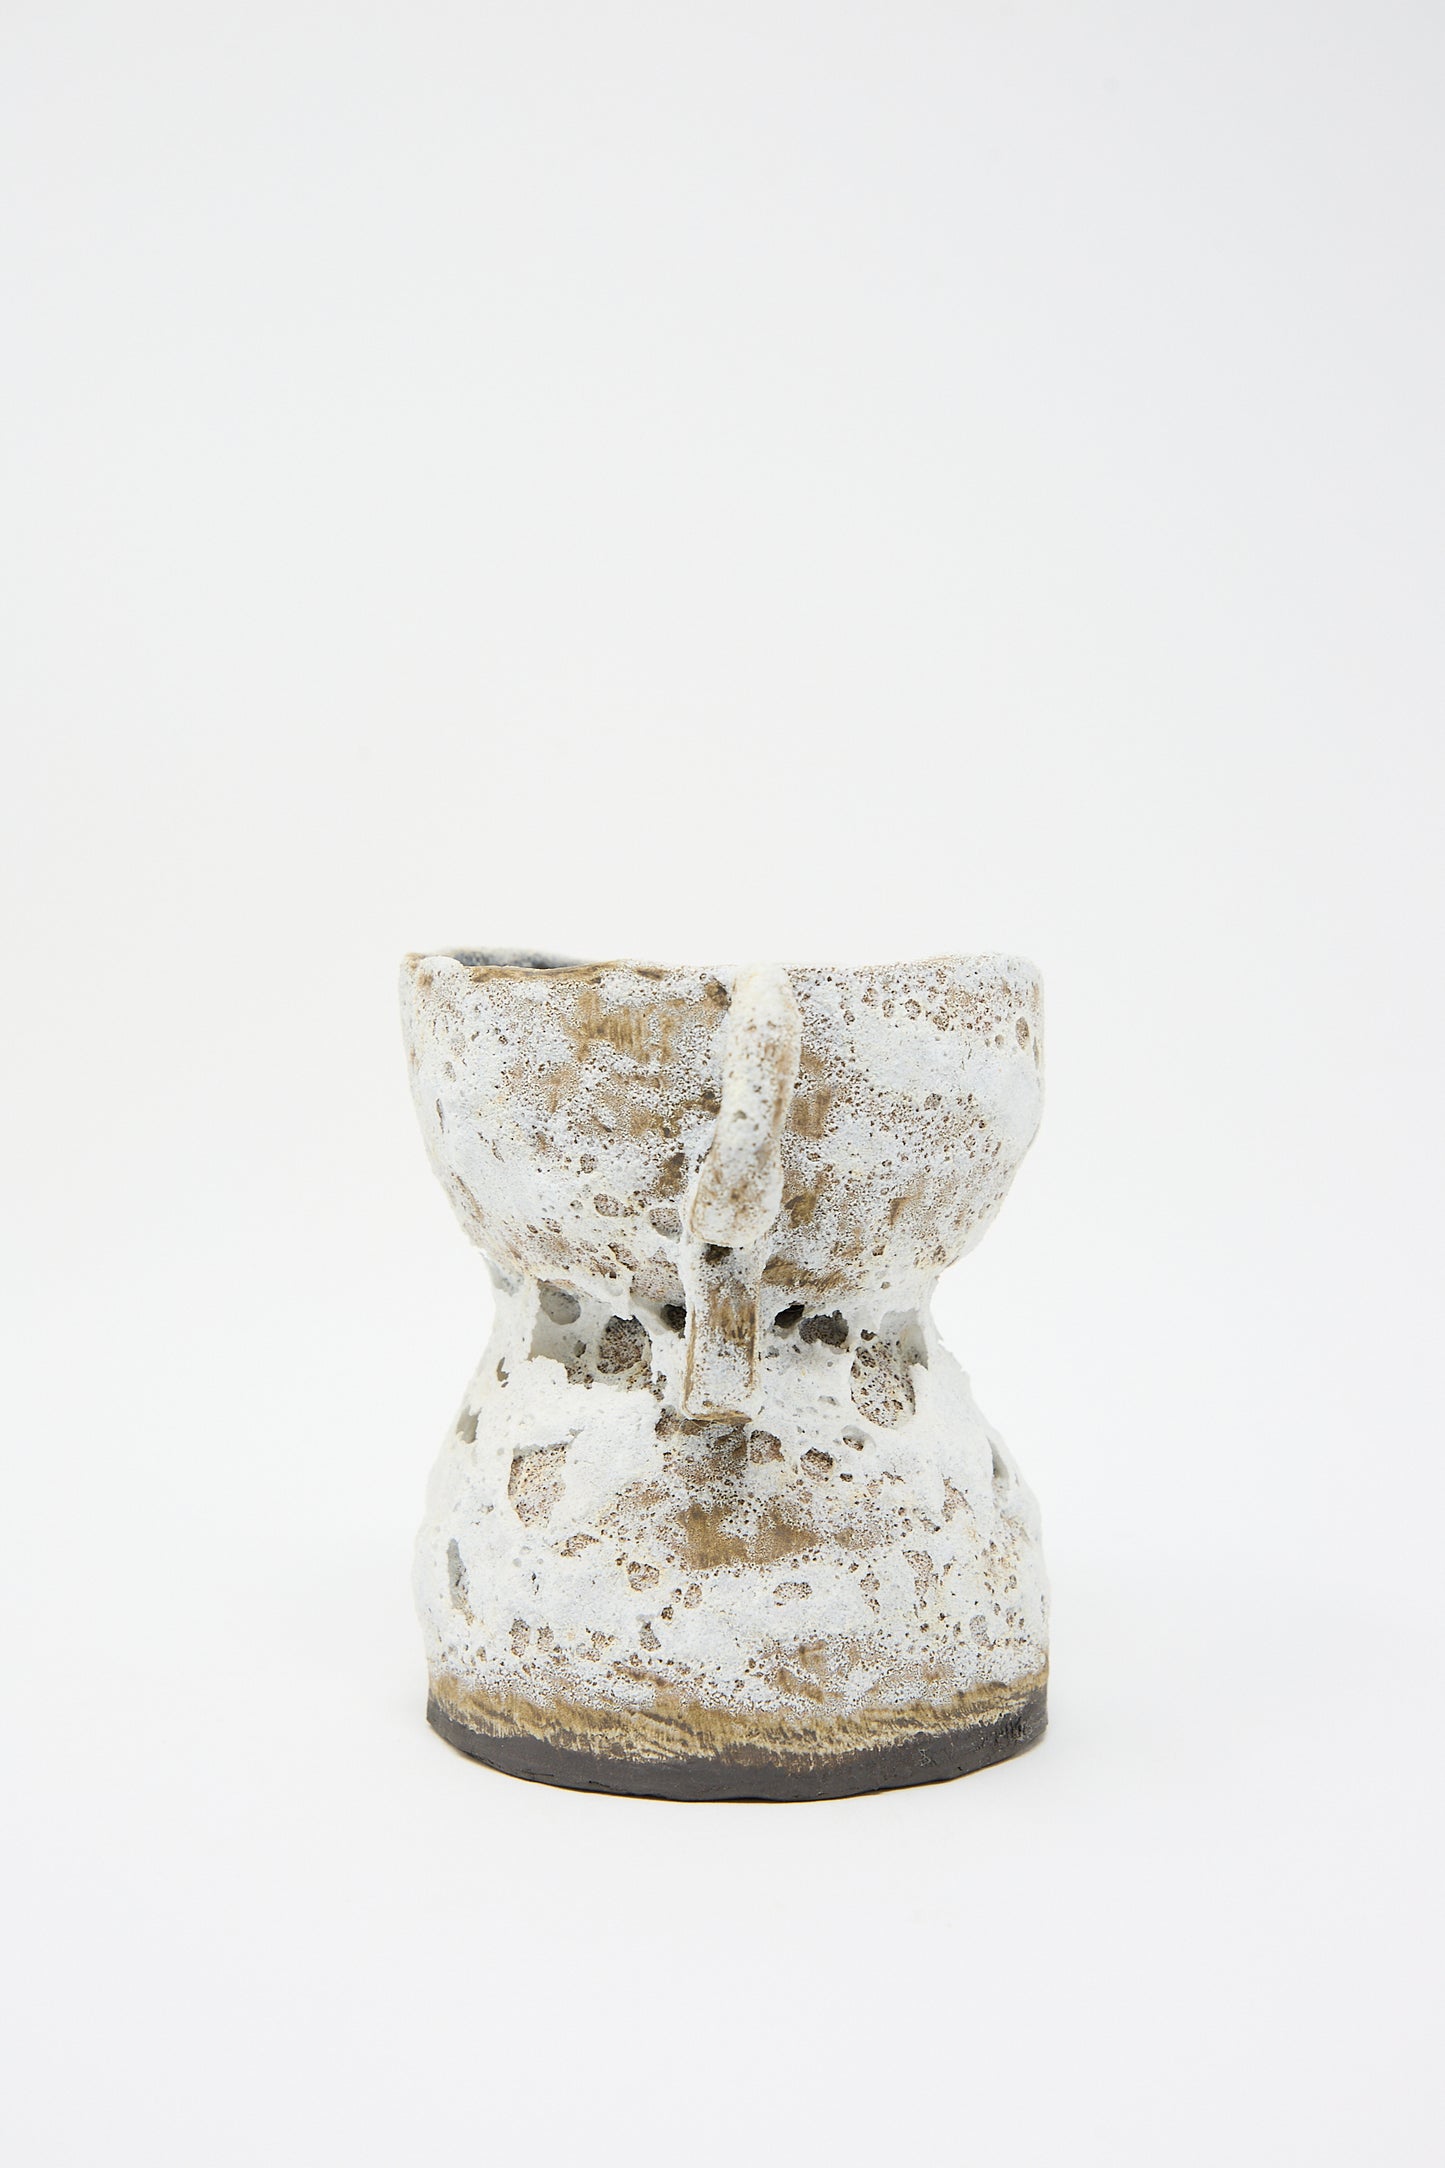 A white, hand-built vase with a narrow base and wide, irregularly shaped opening, displayed on a plain white background. The Ancient One Vase by Tania Whalen.